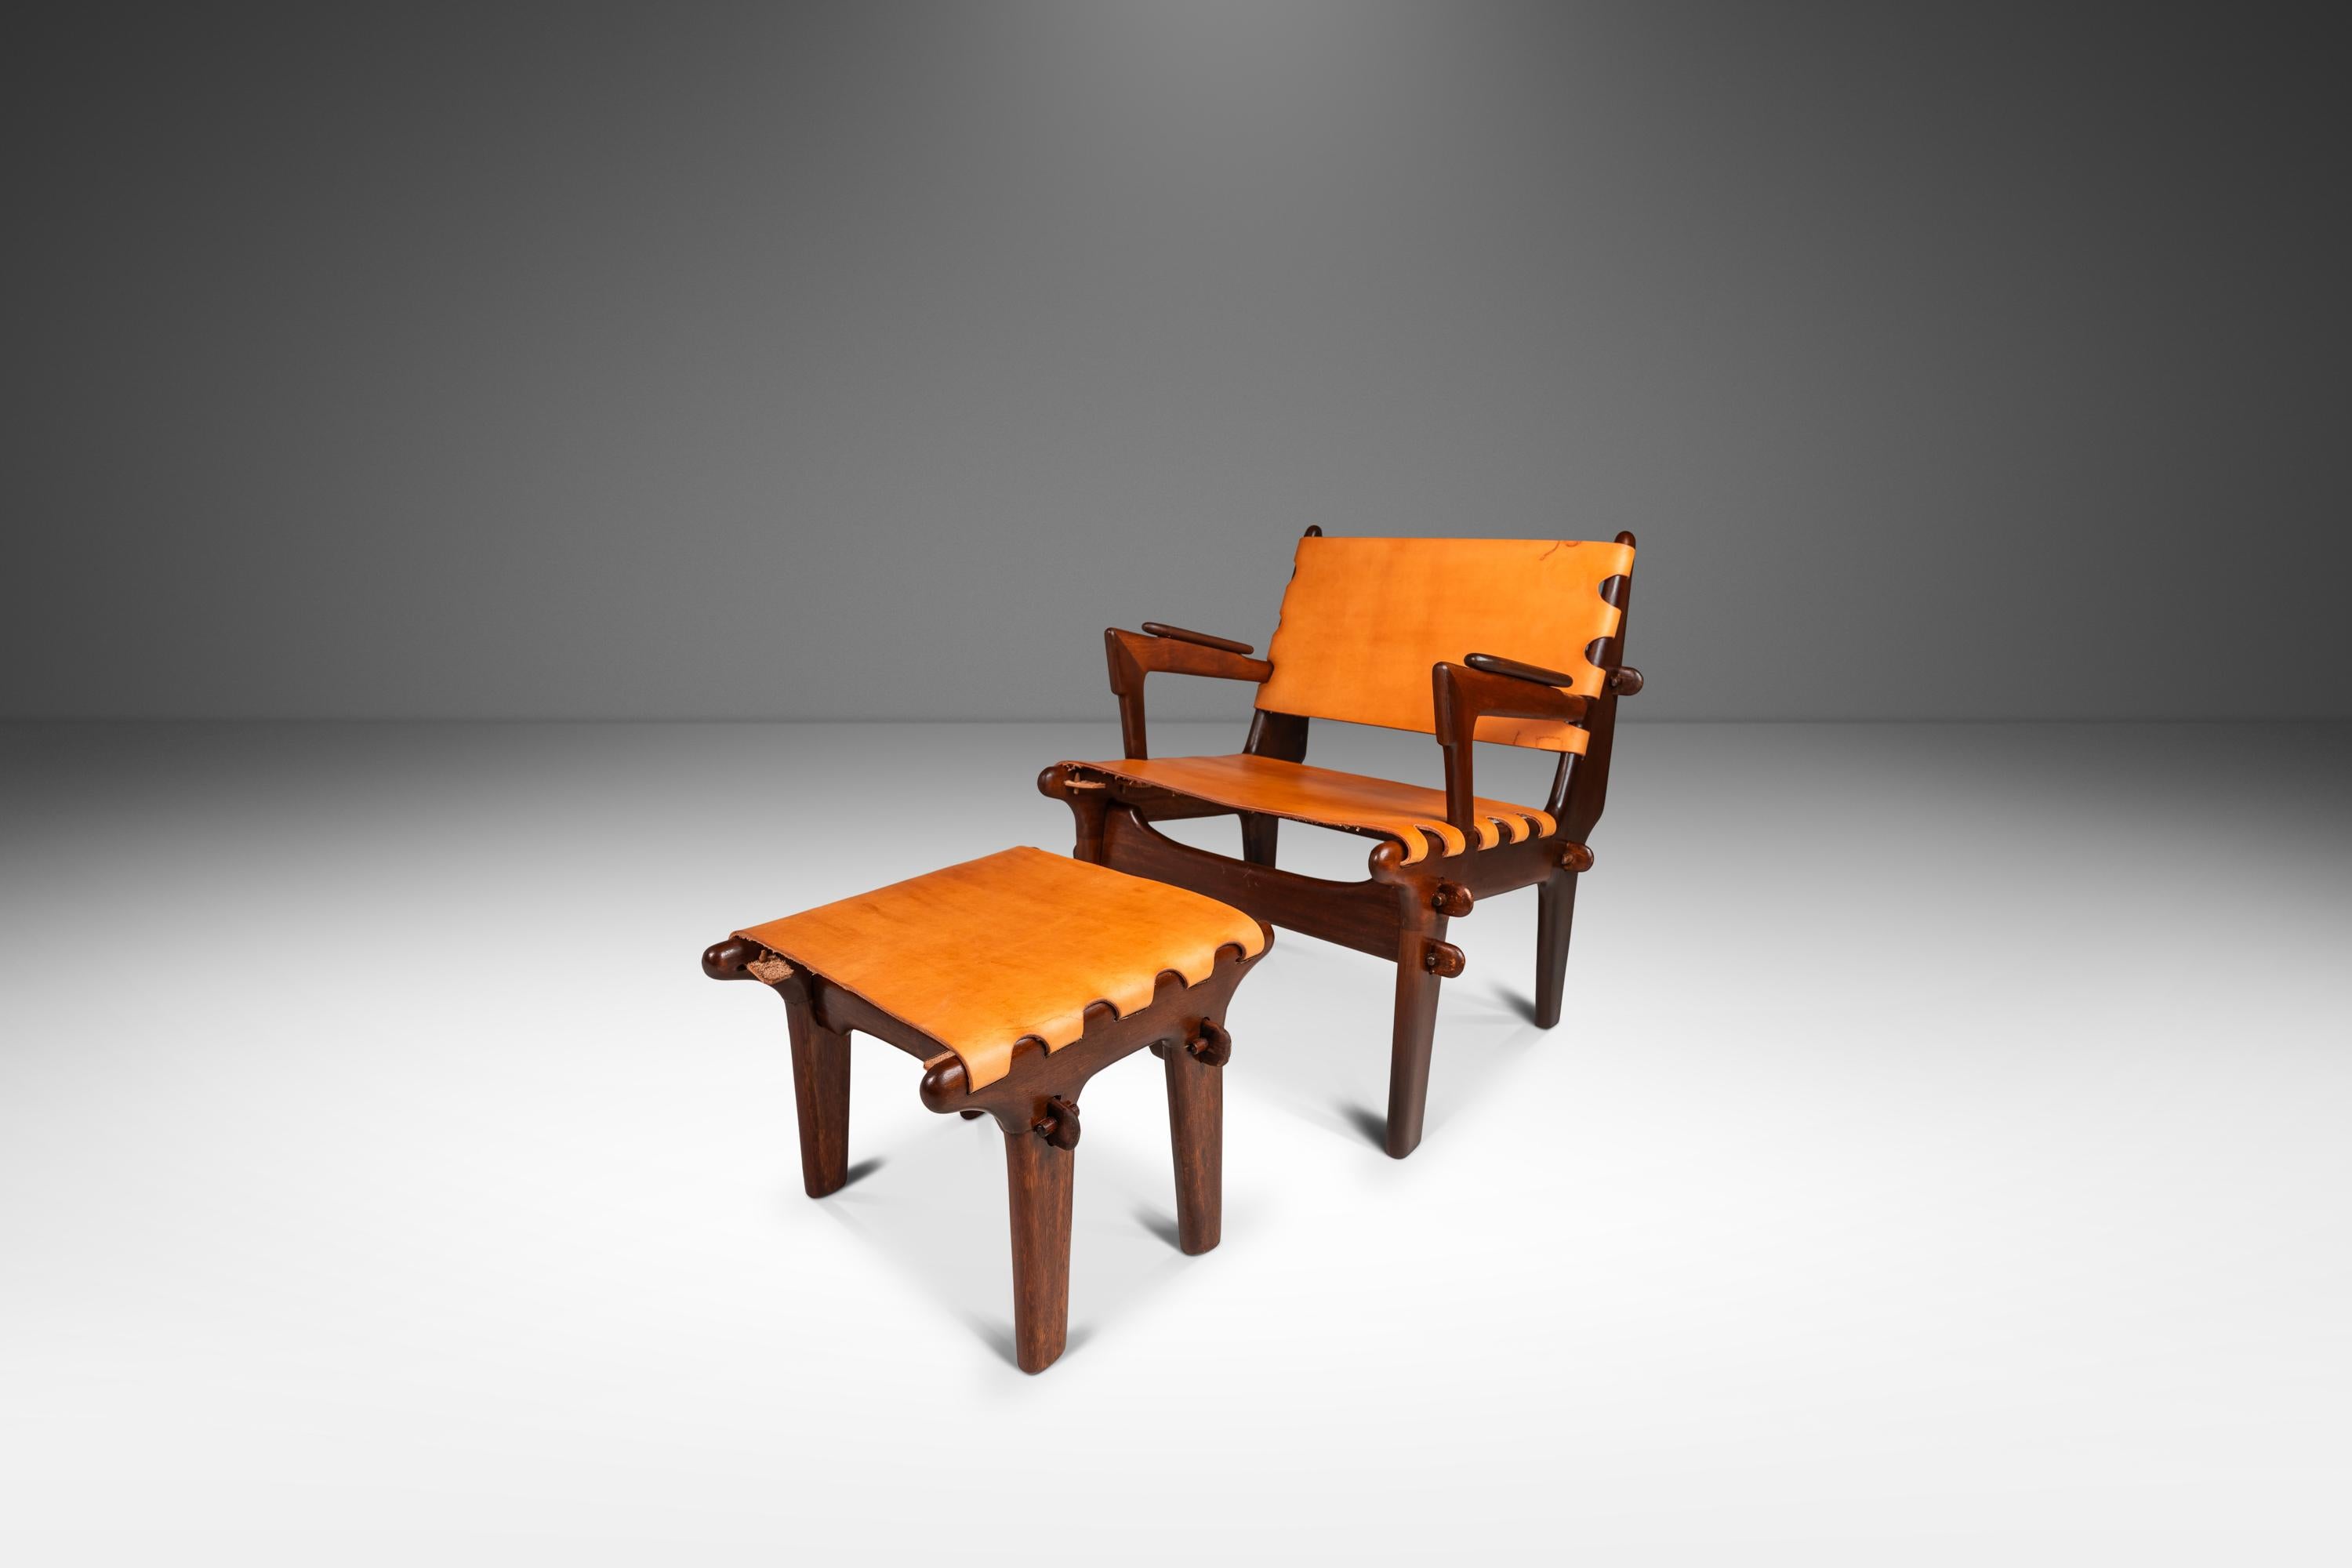 Introducing a rare sling chair and ottoman set by the incomparable Angel Pazmino. Recently and painstakingly restored by our team of craftsmen this iconic set has a new lease on life and we love the results. The solid jacaranda wood frames have been